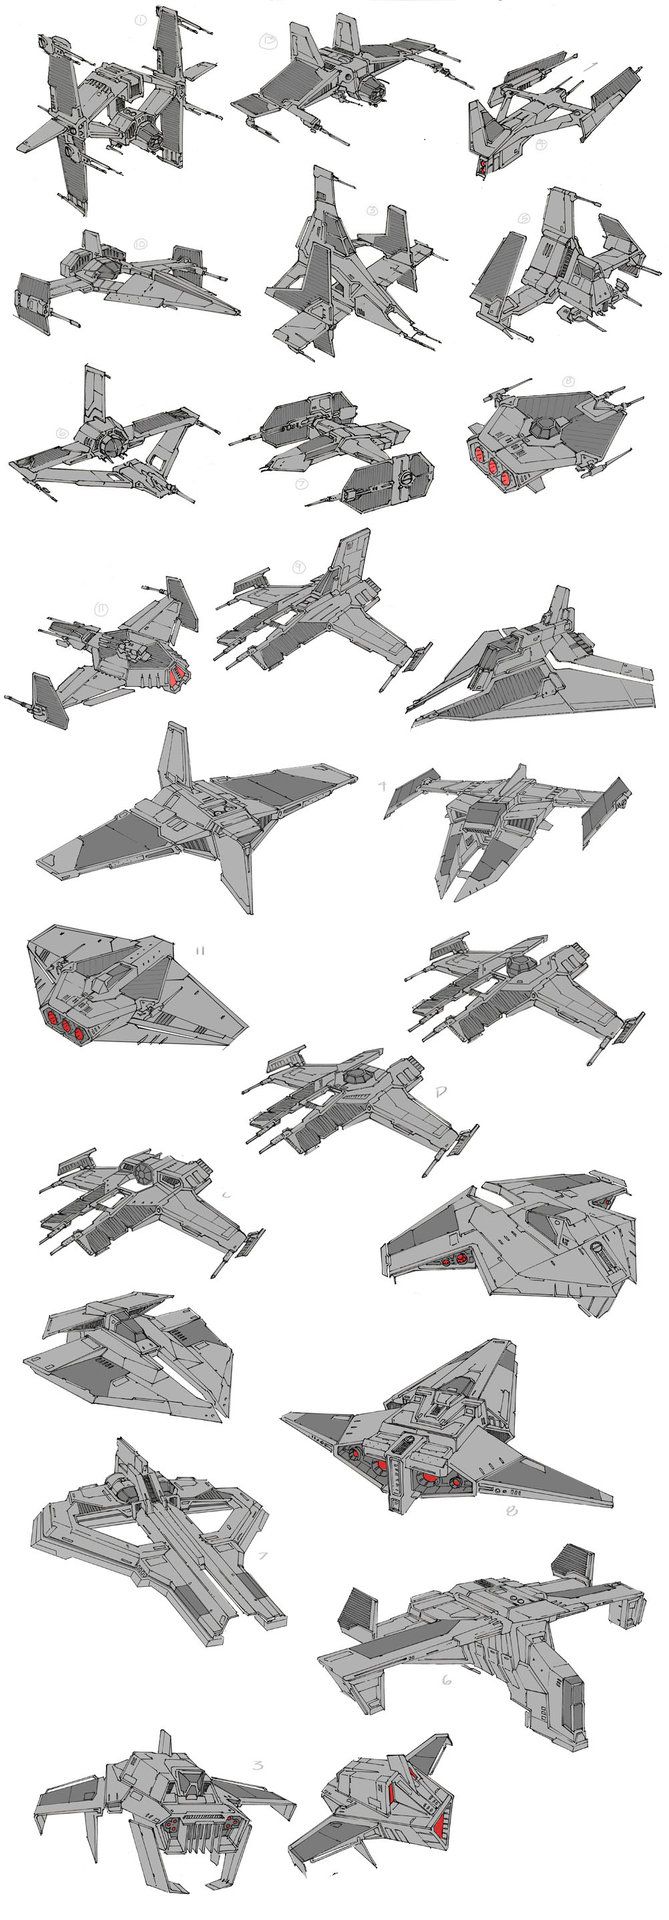 My work for a player ship for Star Wars The Old Republic expansion-Galactic Star...